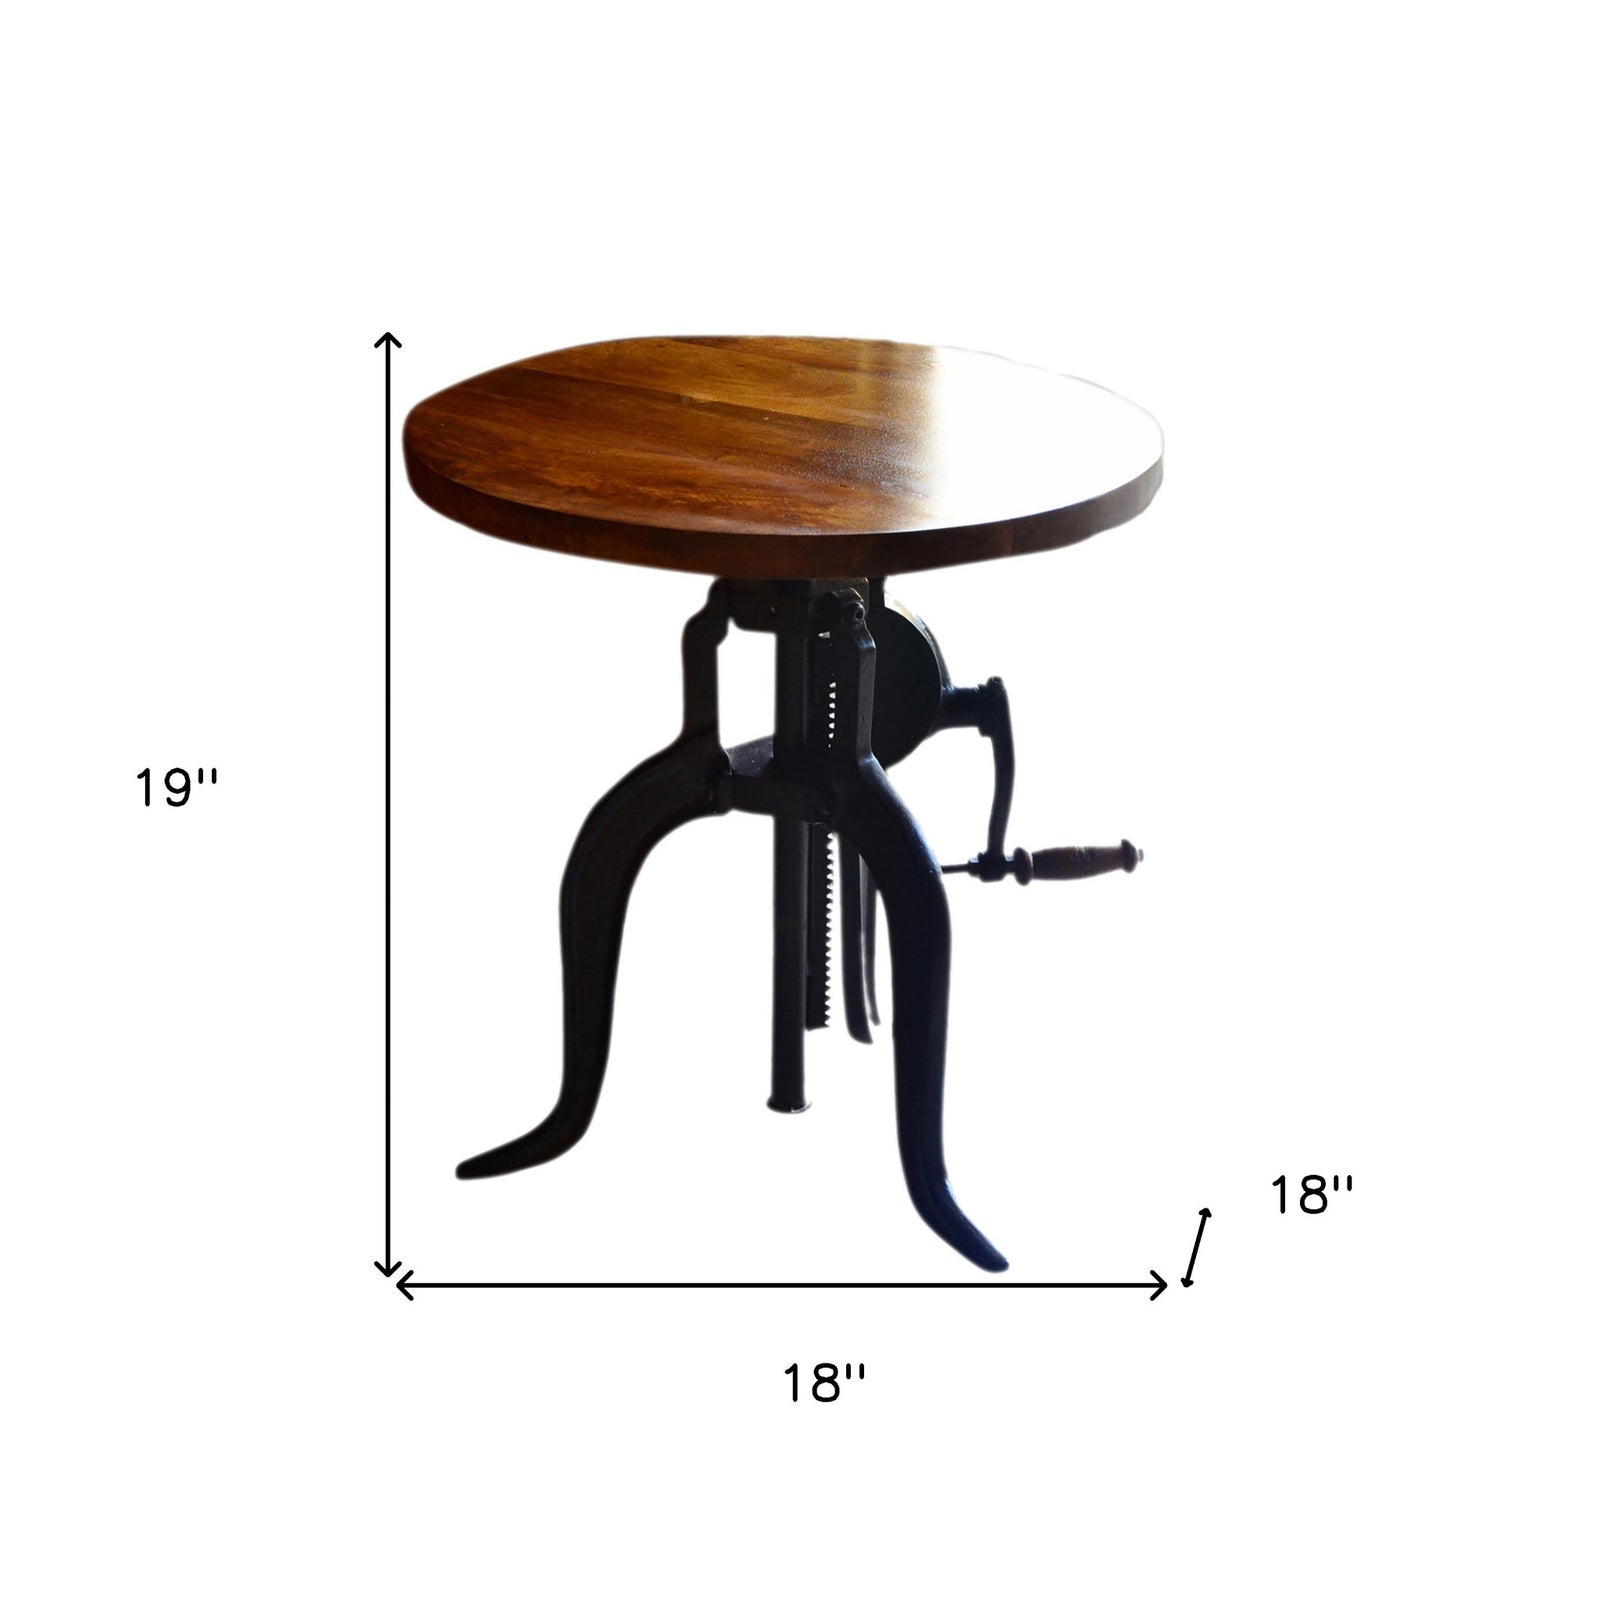 19" Black And Chestnut Solid Wood Round End Table